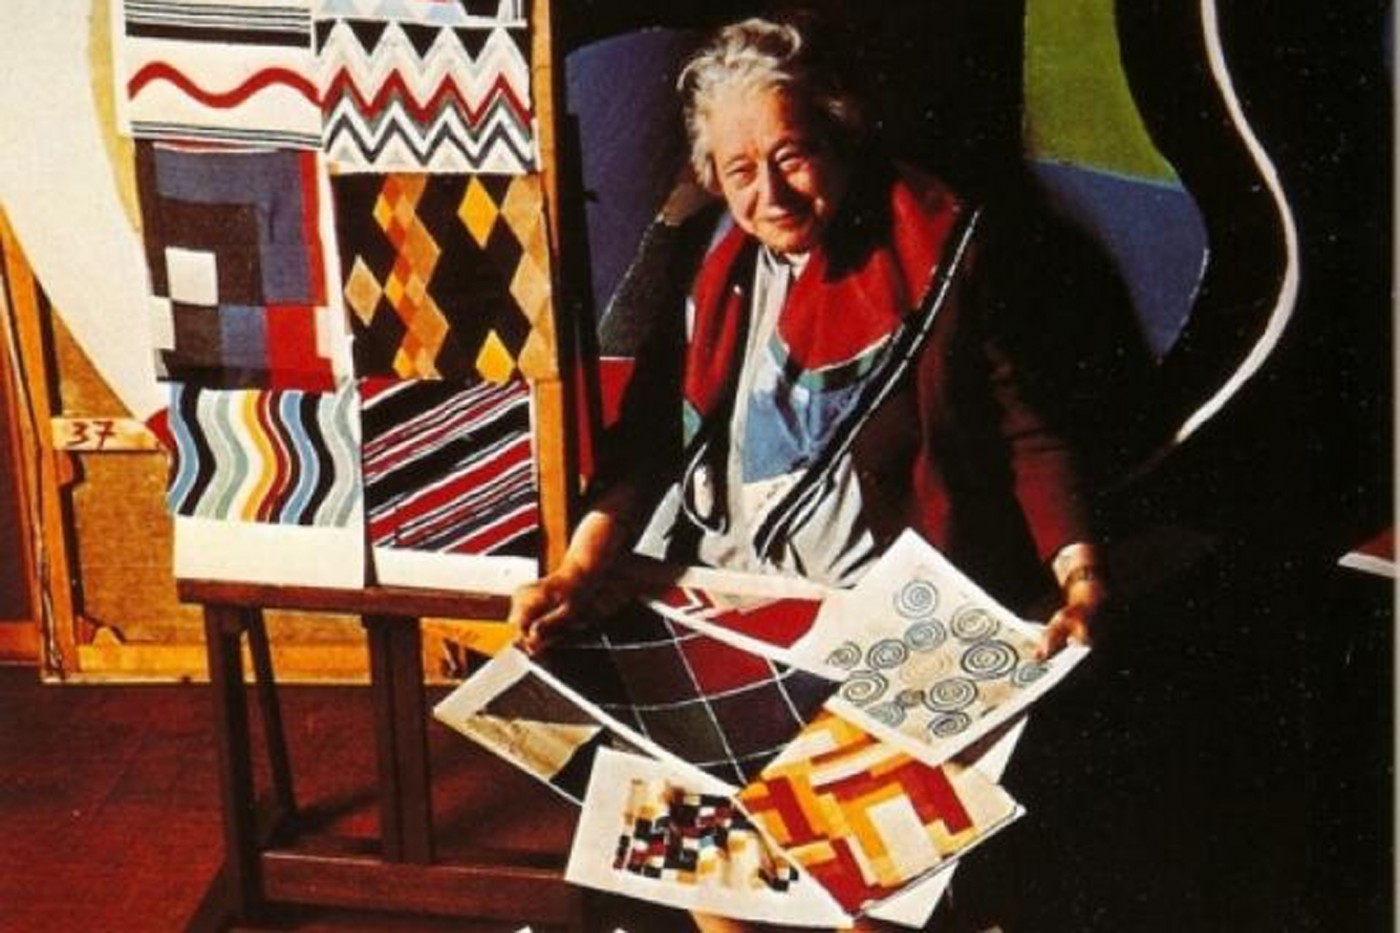 International Women's Day 2022 Spotlight on the life and work of artist Sonia Delaunay